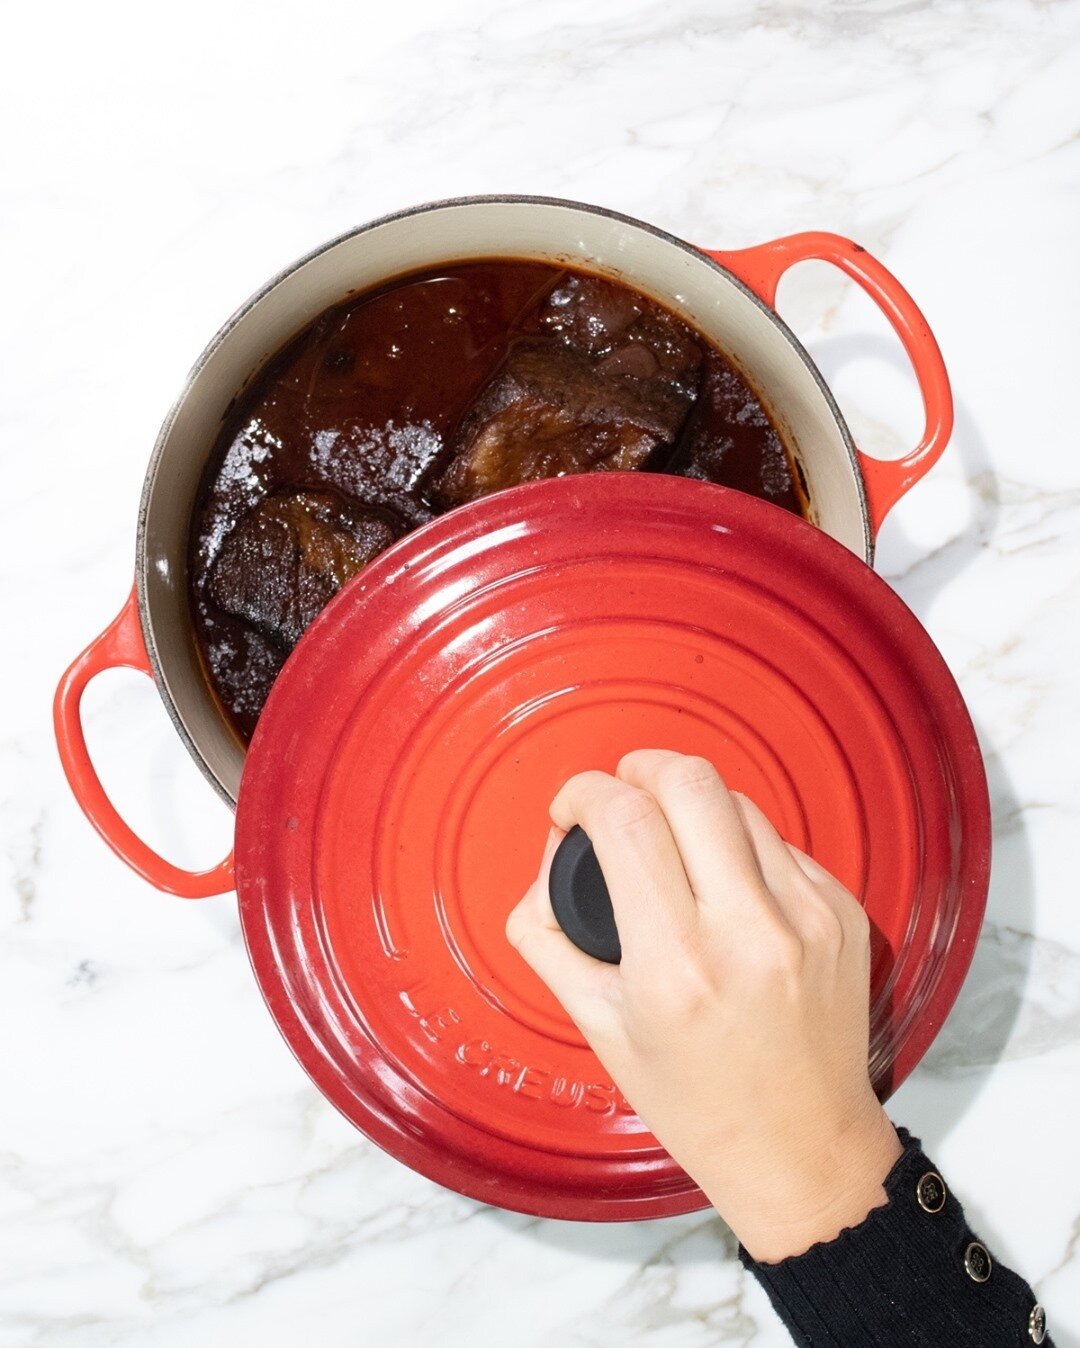 Want another secret on how to change up the traditional corned beef and cabbage? 🤫 

I told you how to change up the cabbage, and now it&rsquo;s time for the beef!

For St. Patty&rsquo;s Day this year, I am using my super versatile braised short rib